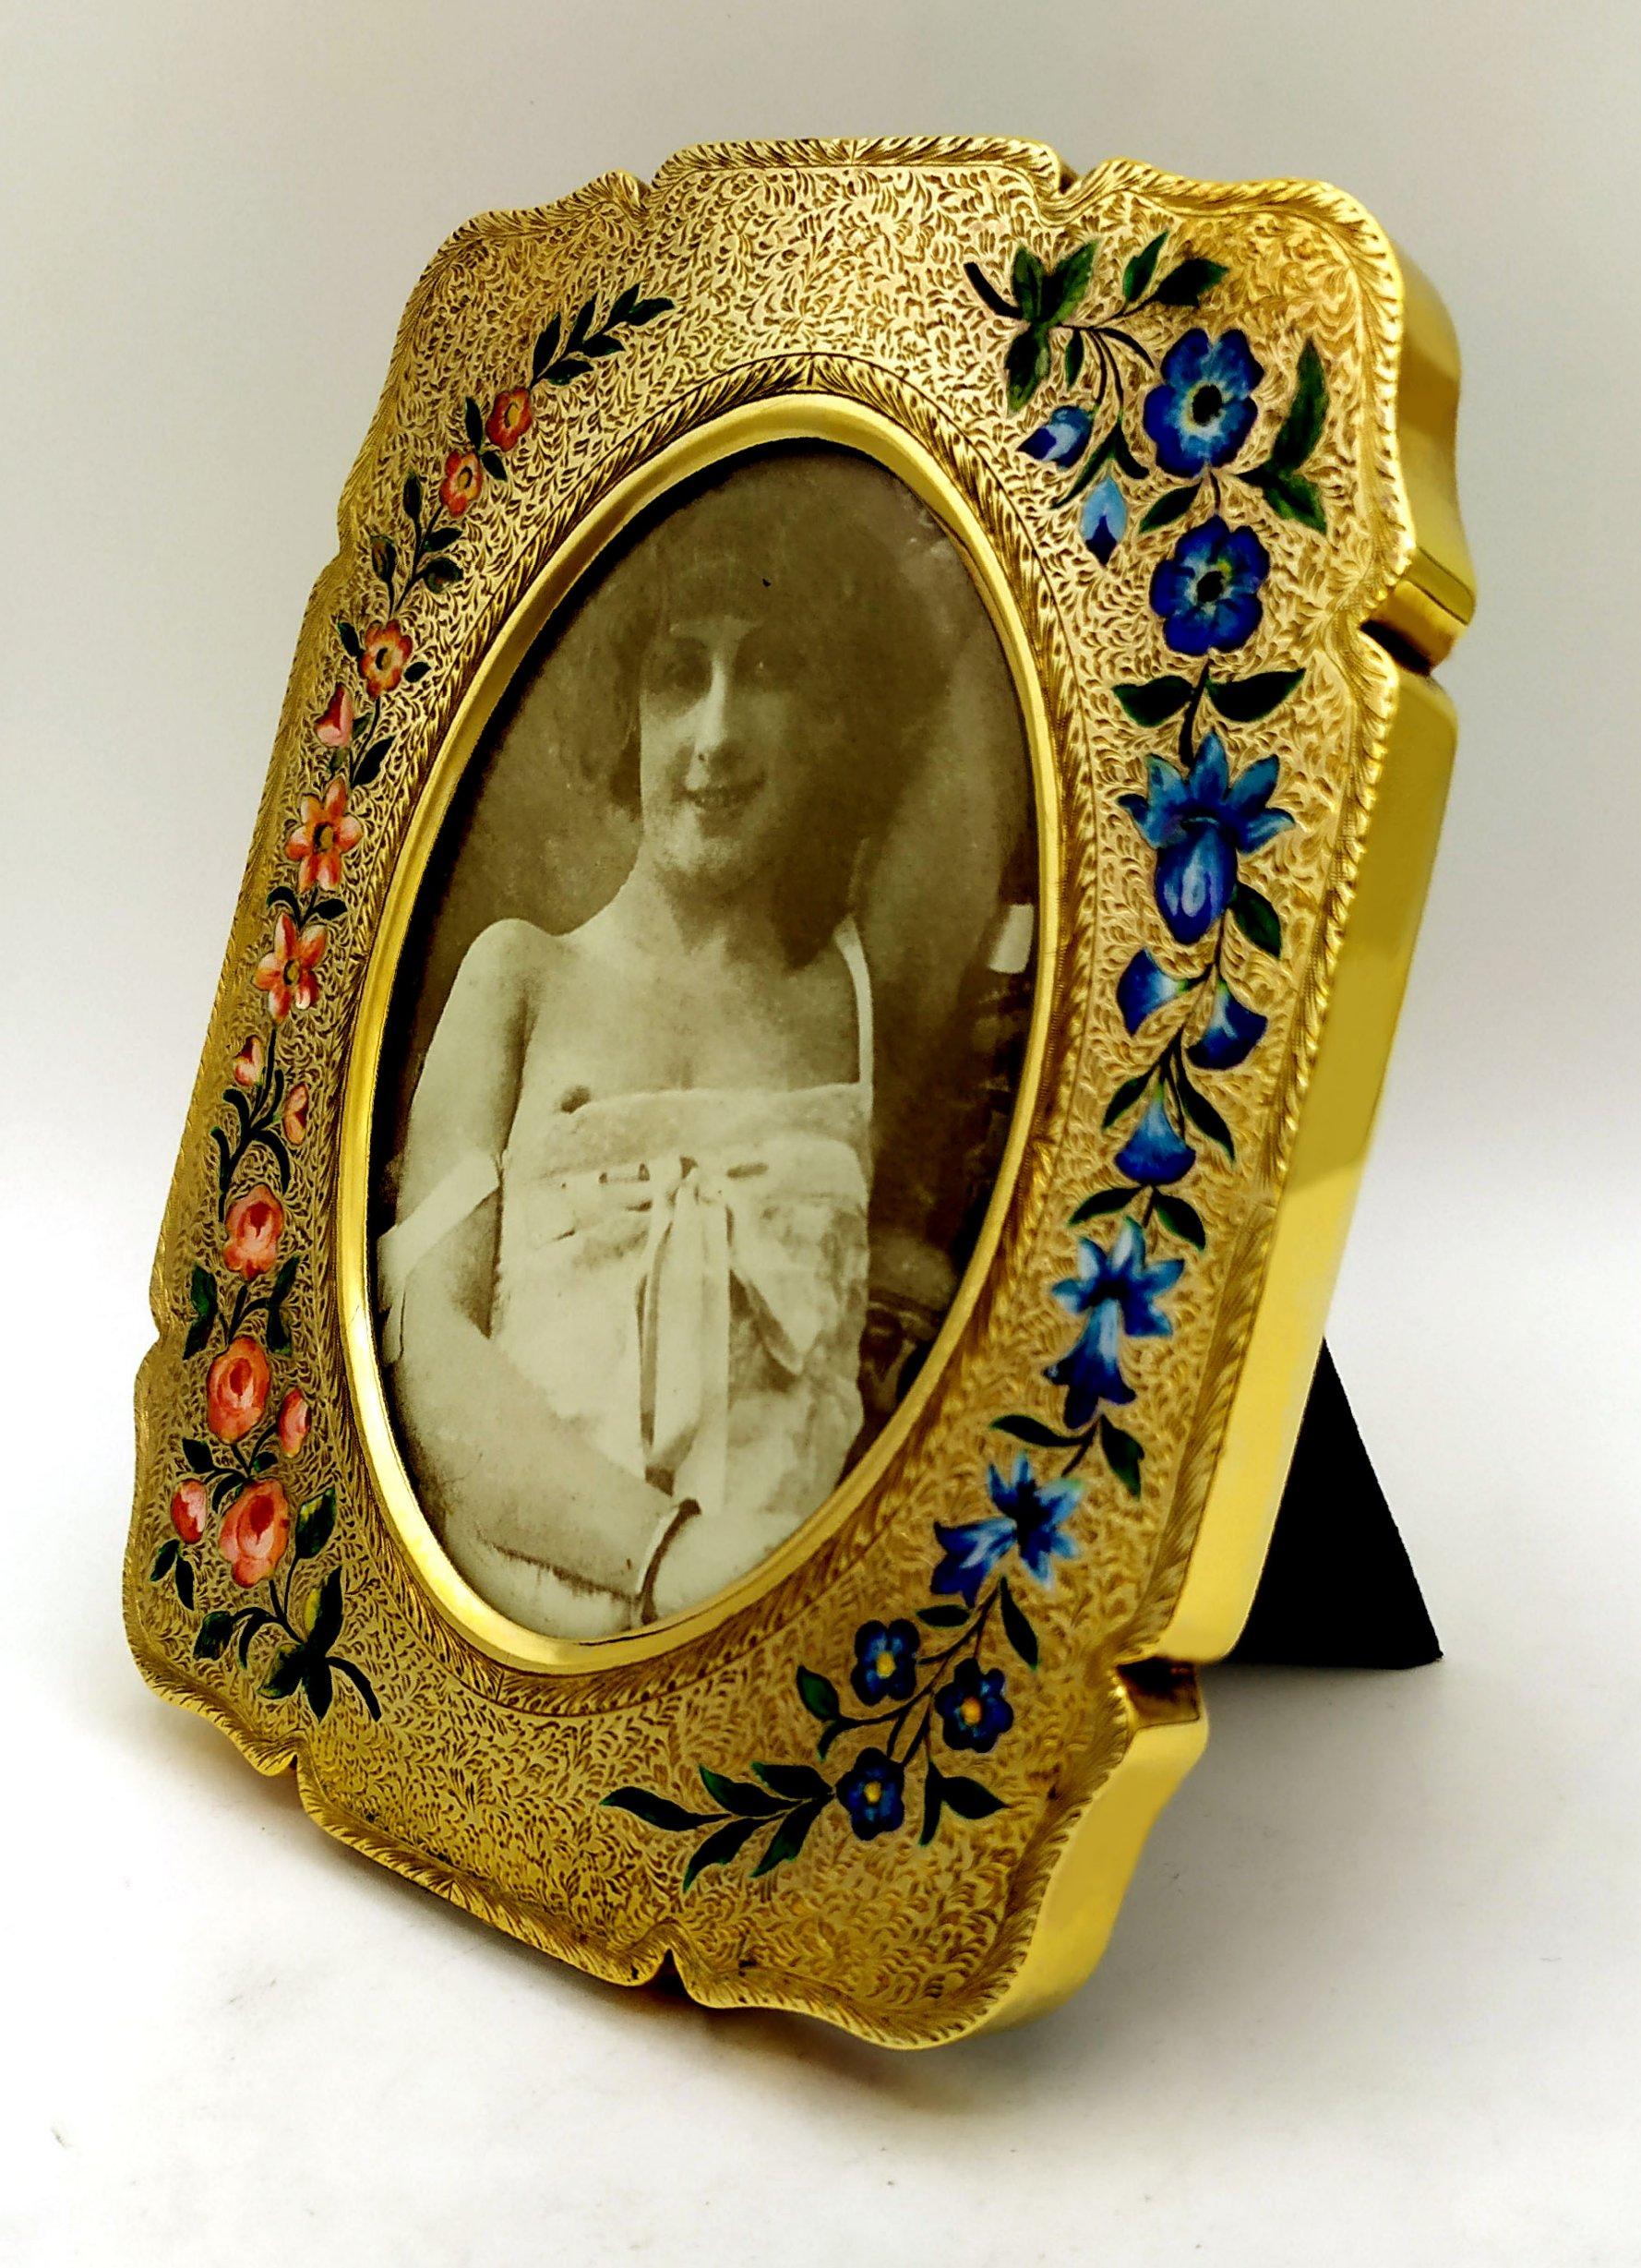 Rectangular shaped frame for oval photos cm. 7.8 x 10.4 in 925/1000 sterling silver gold plated with very fine fire-enameled floral engraving and hand-painted by the painter Renato Dainelli, in Art Nouveau style, early 1900s. External measurements